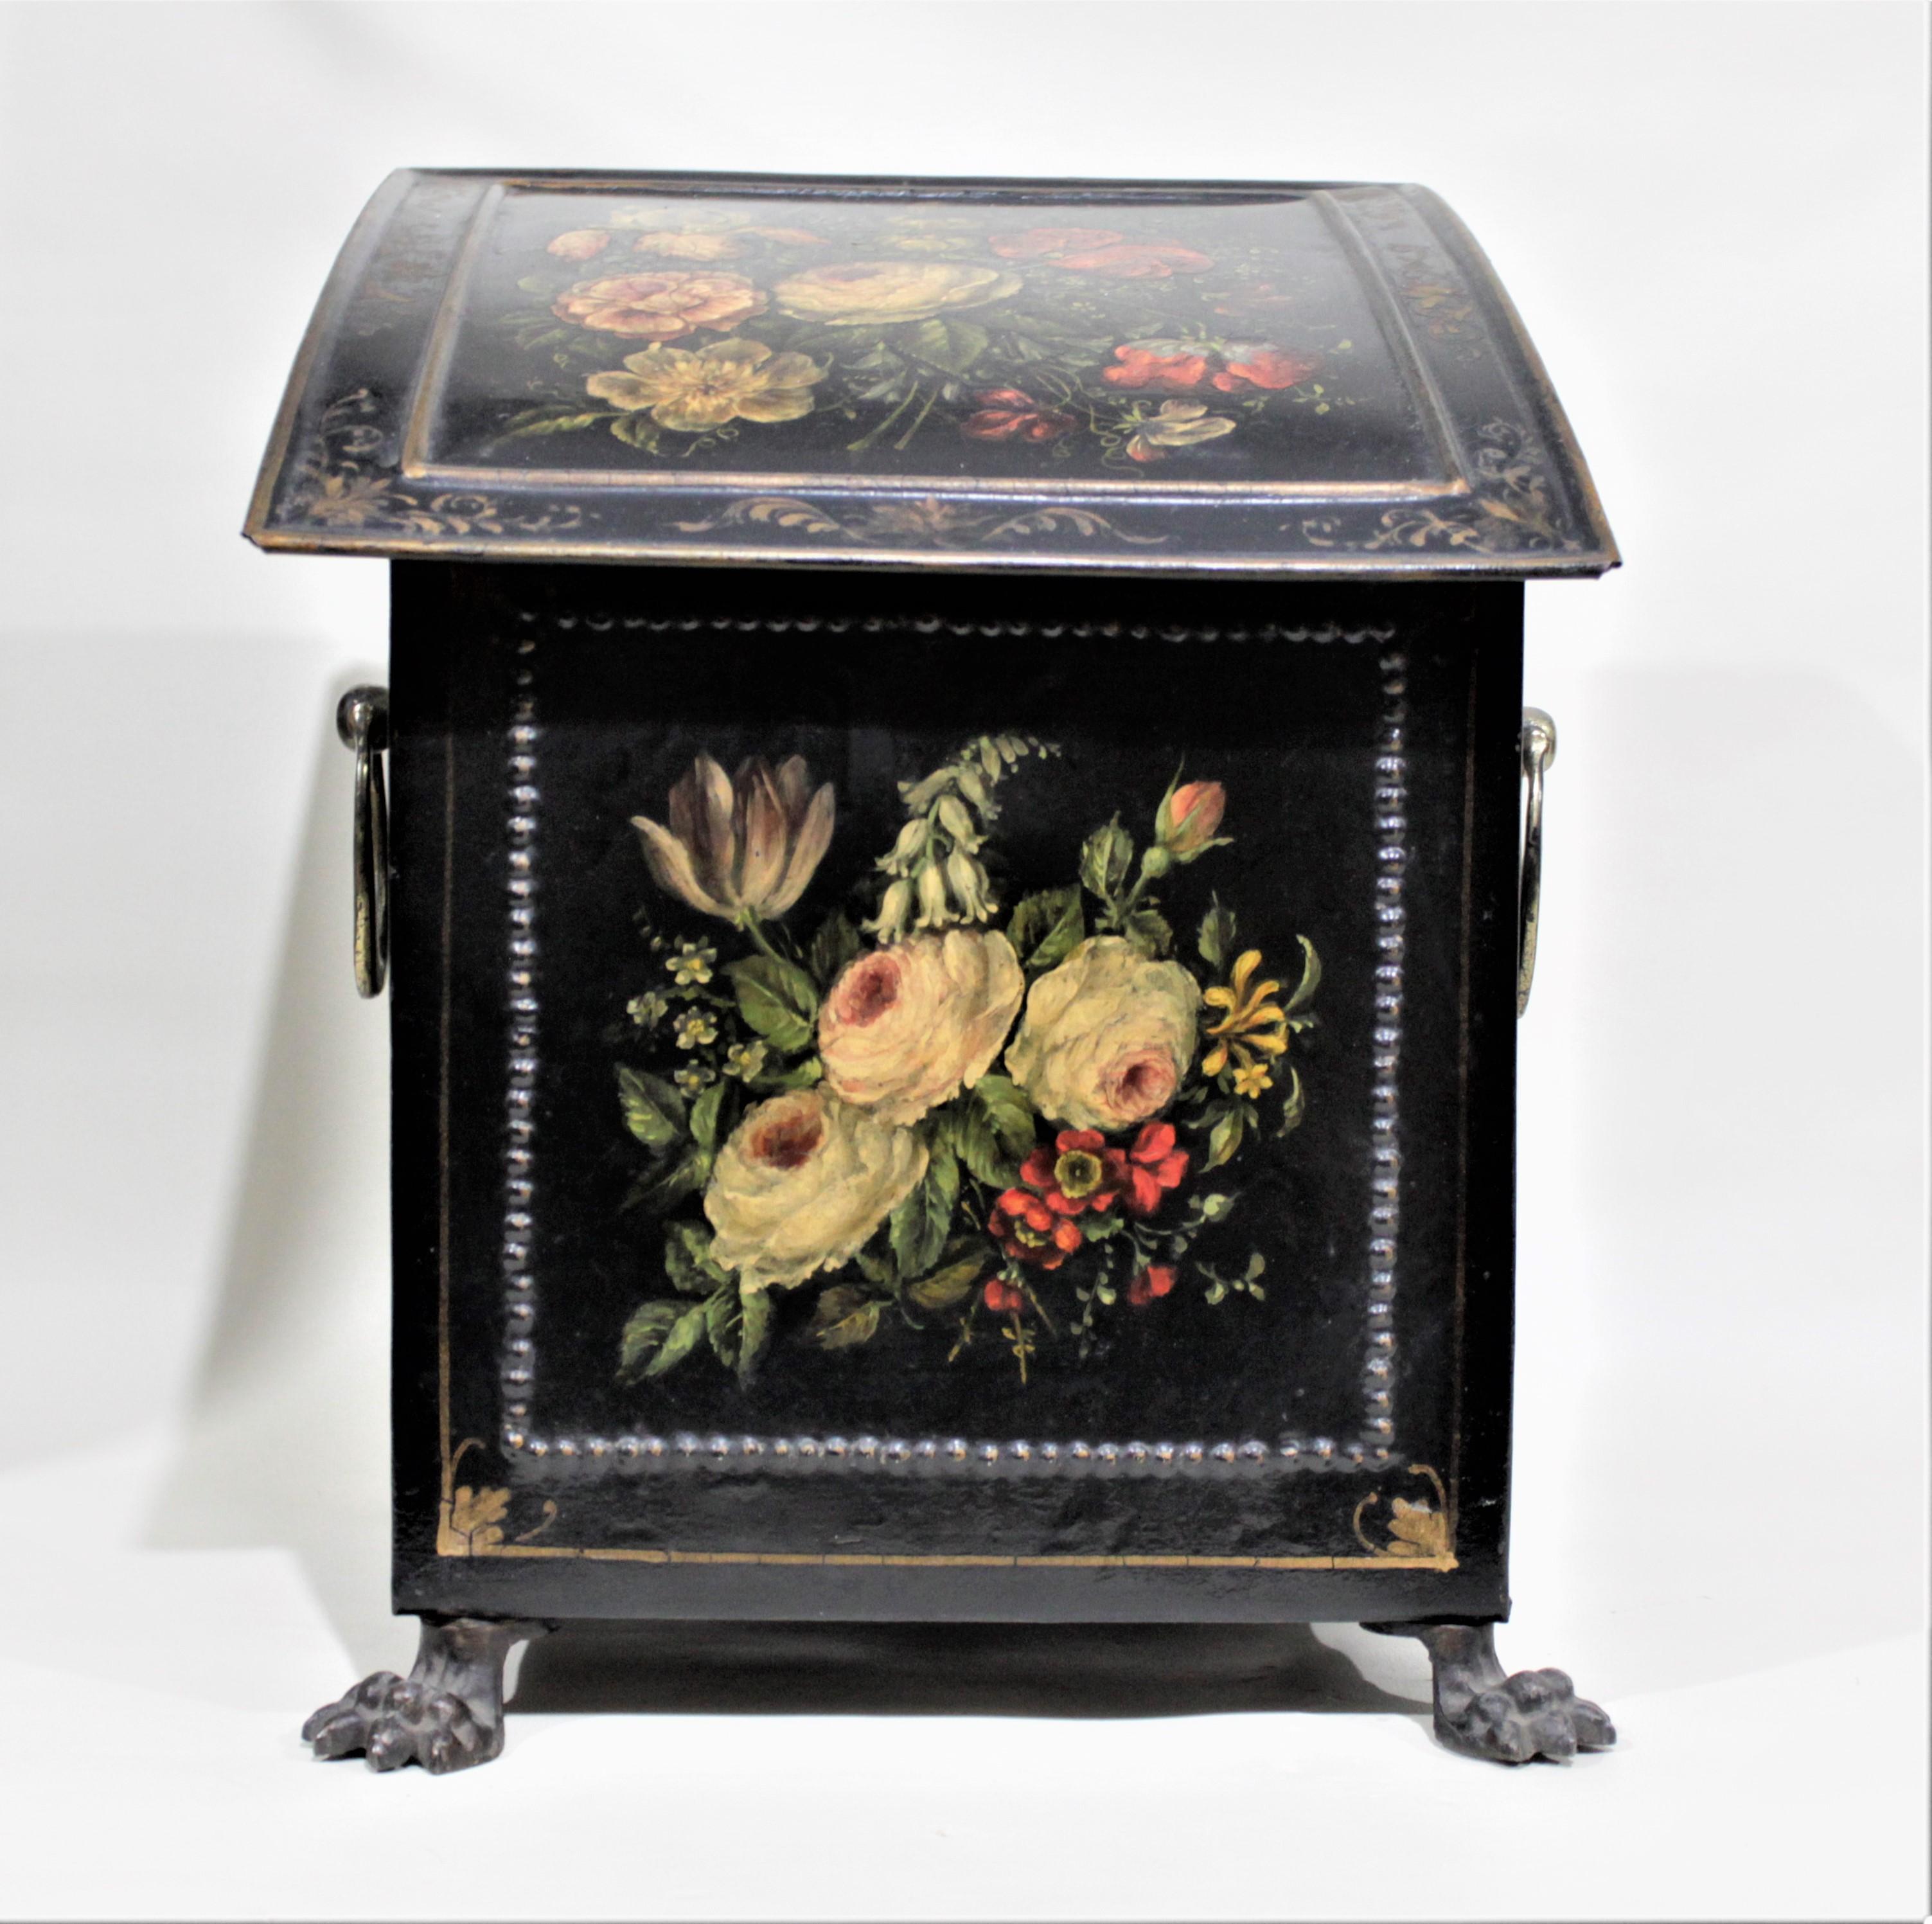 This antique metal coal box or coal scuttle is presumably made in England during the 1820s in the Regency period and style. The box is constructed of thin metal sheeting, with a convex hinged top and claw feet. The entire box is painted in a glossy